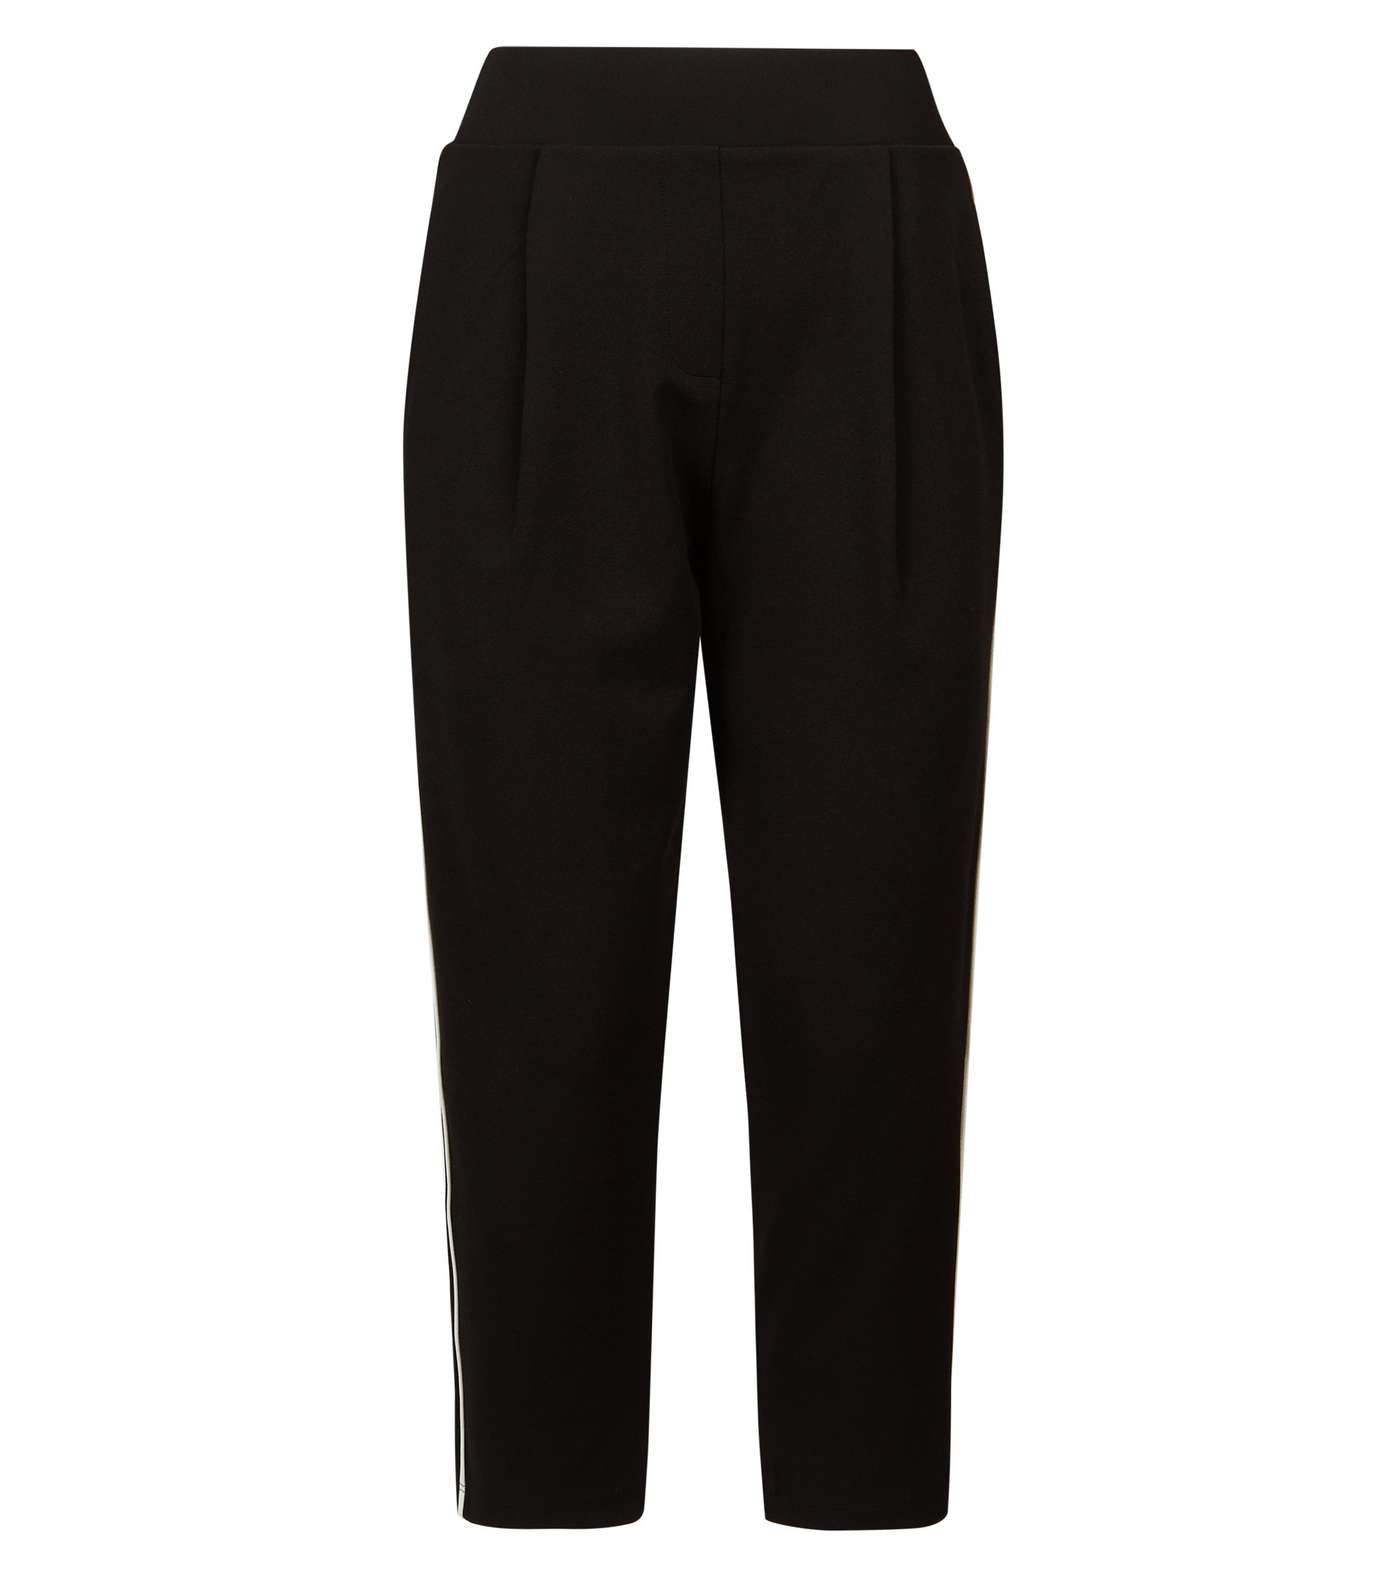 Petite Black Piped Side Stripe Tapered Trousers Image 4